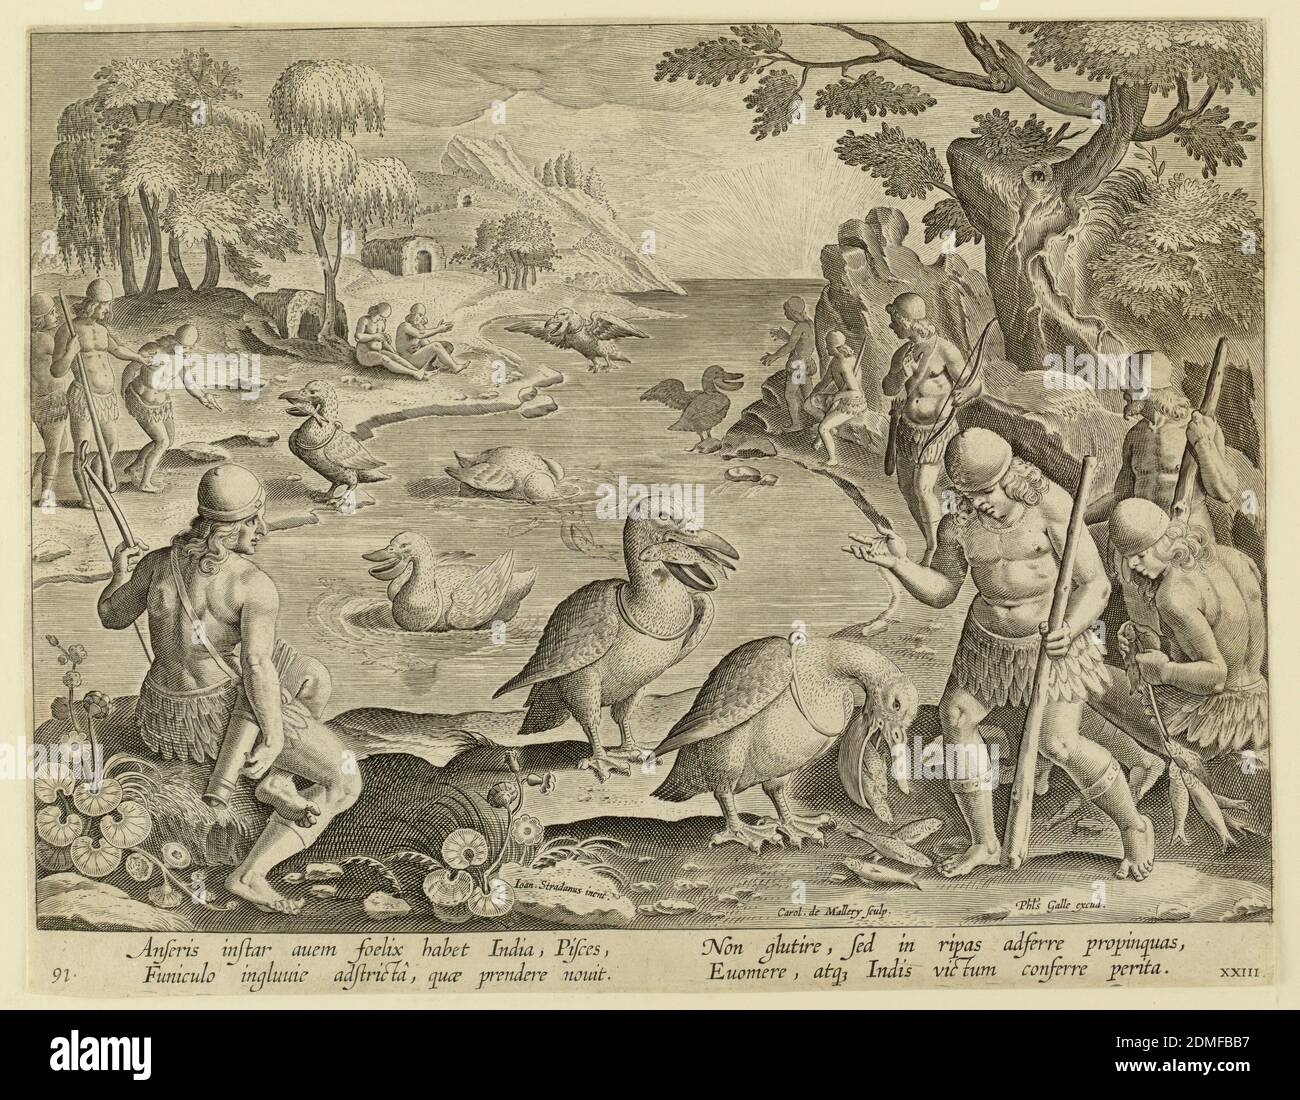 Indians Catching Fish with the Help of Pelicans, plate 23 in the Venationes Ferarum, Avium, Piscium series, Jan van der Straet, called Stradanus, Flemish, 1523–1605, Karel van Mallery, Philips Galle, Flemish, 1537 - 1612, engraving on paper, Horizontal rectangle. An inlet, with men standing on shore on both sides, watching the pelicans gather fish in their pouches. Each bird bears a ring about its throat to prevent it from swallowing its catch. In the foreground, right, a pelican dislodges the fish before its master. Near left center: 'Ioan. Stradanus invent.' Stock Photo